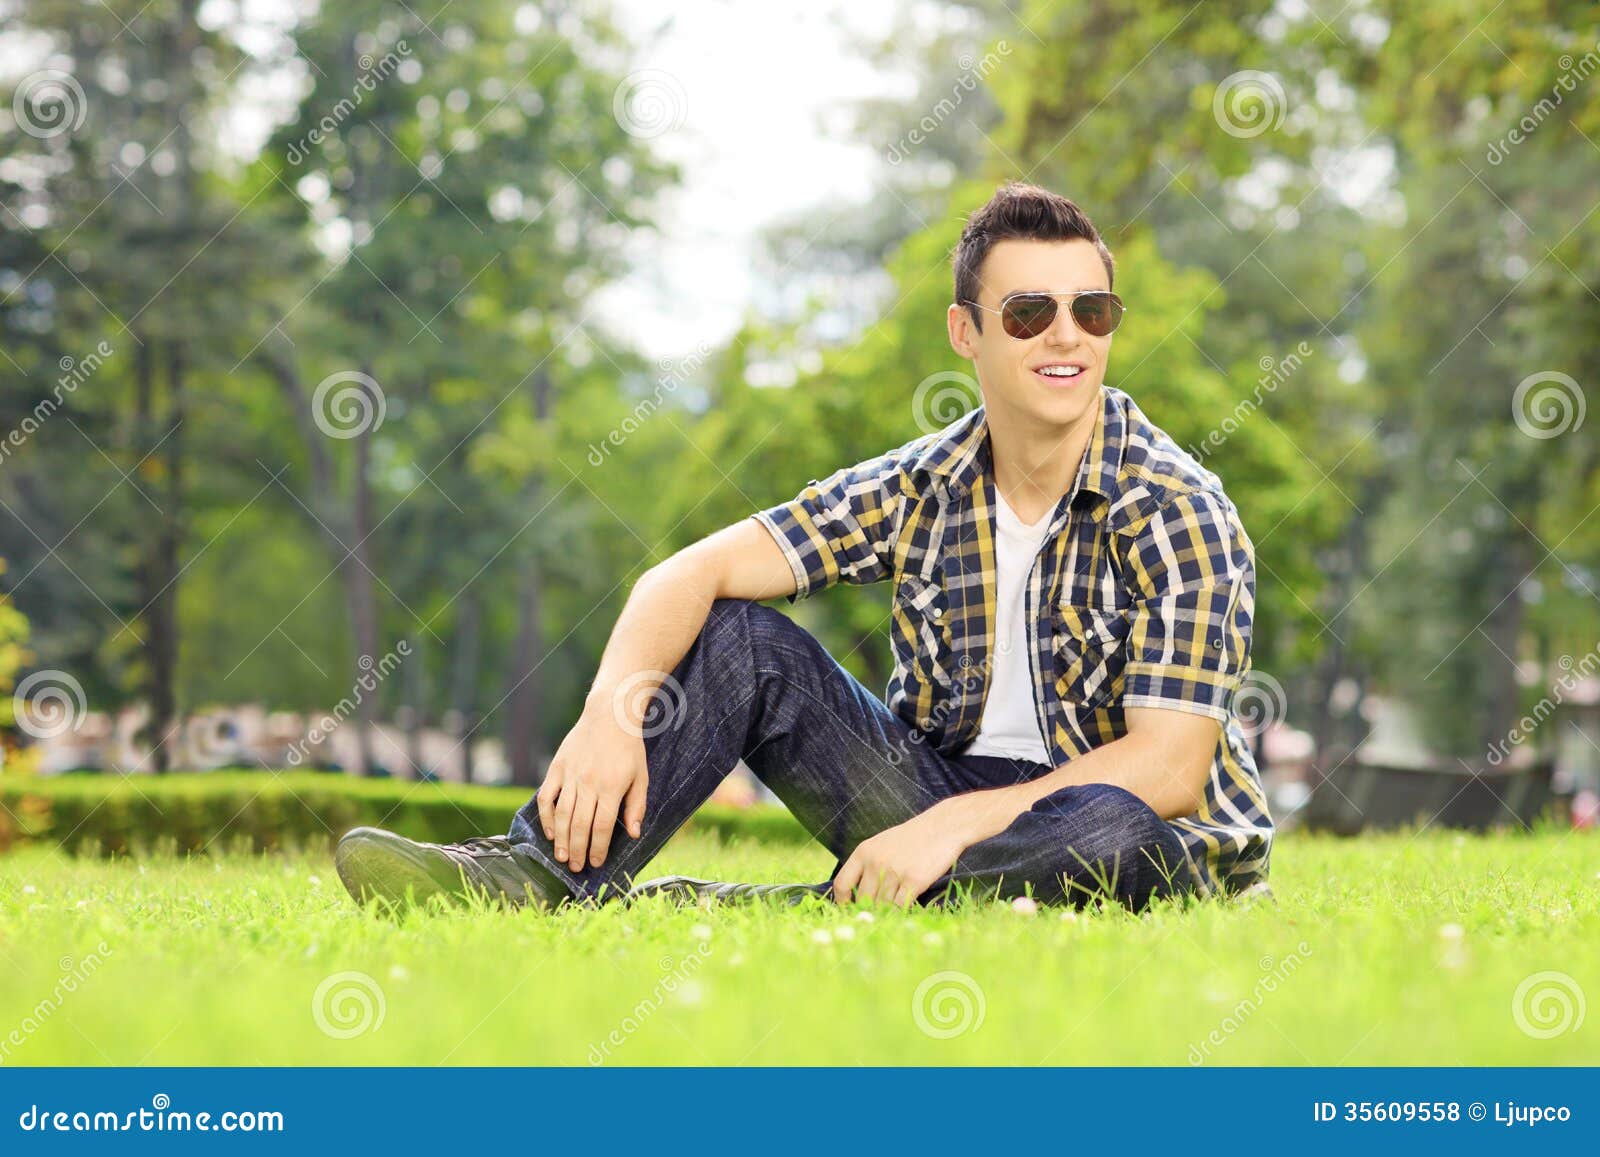 handsome guy sunglasses sitting grass looking cam green camera park 35609558